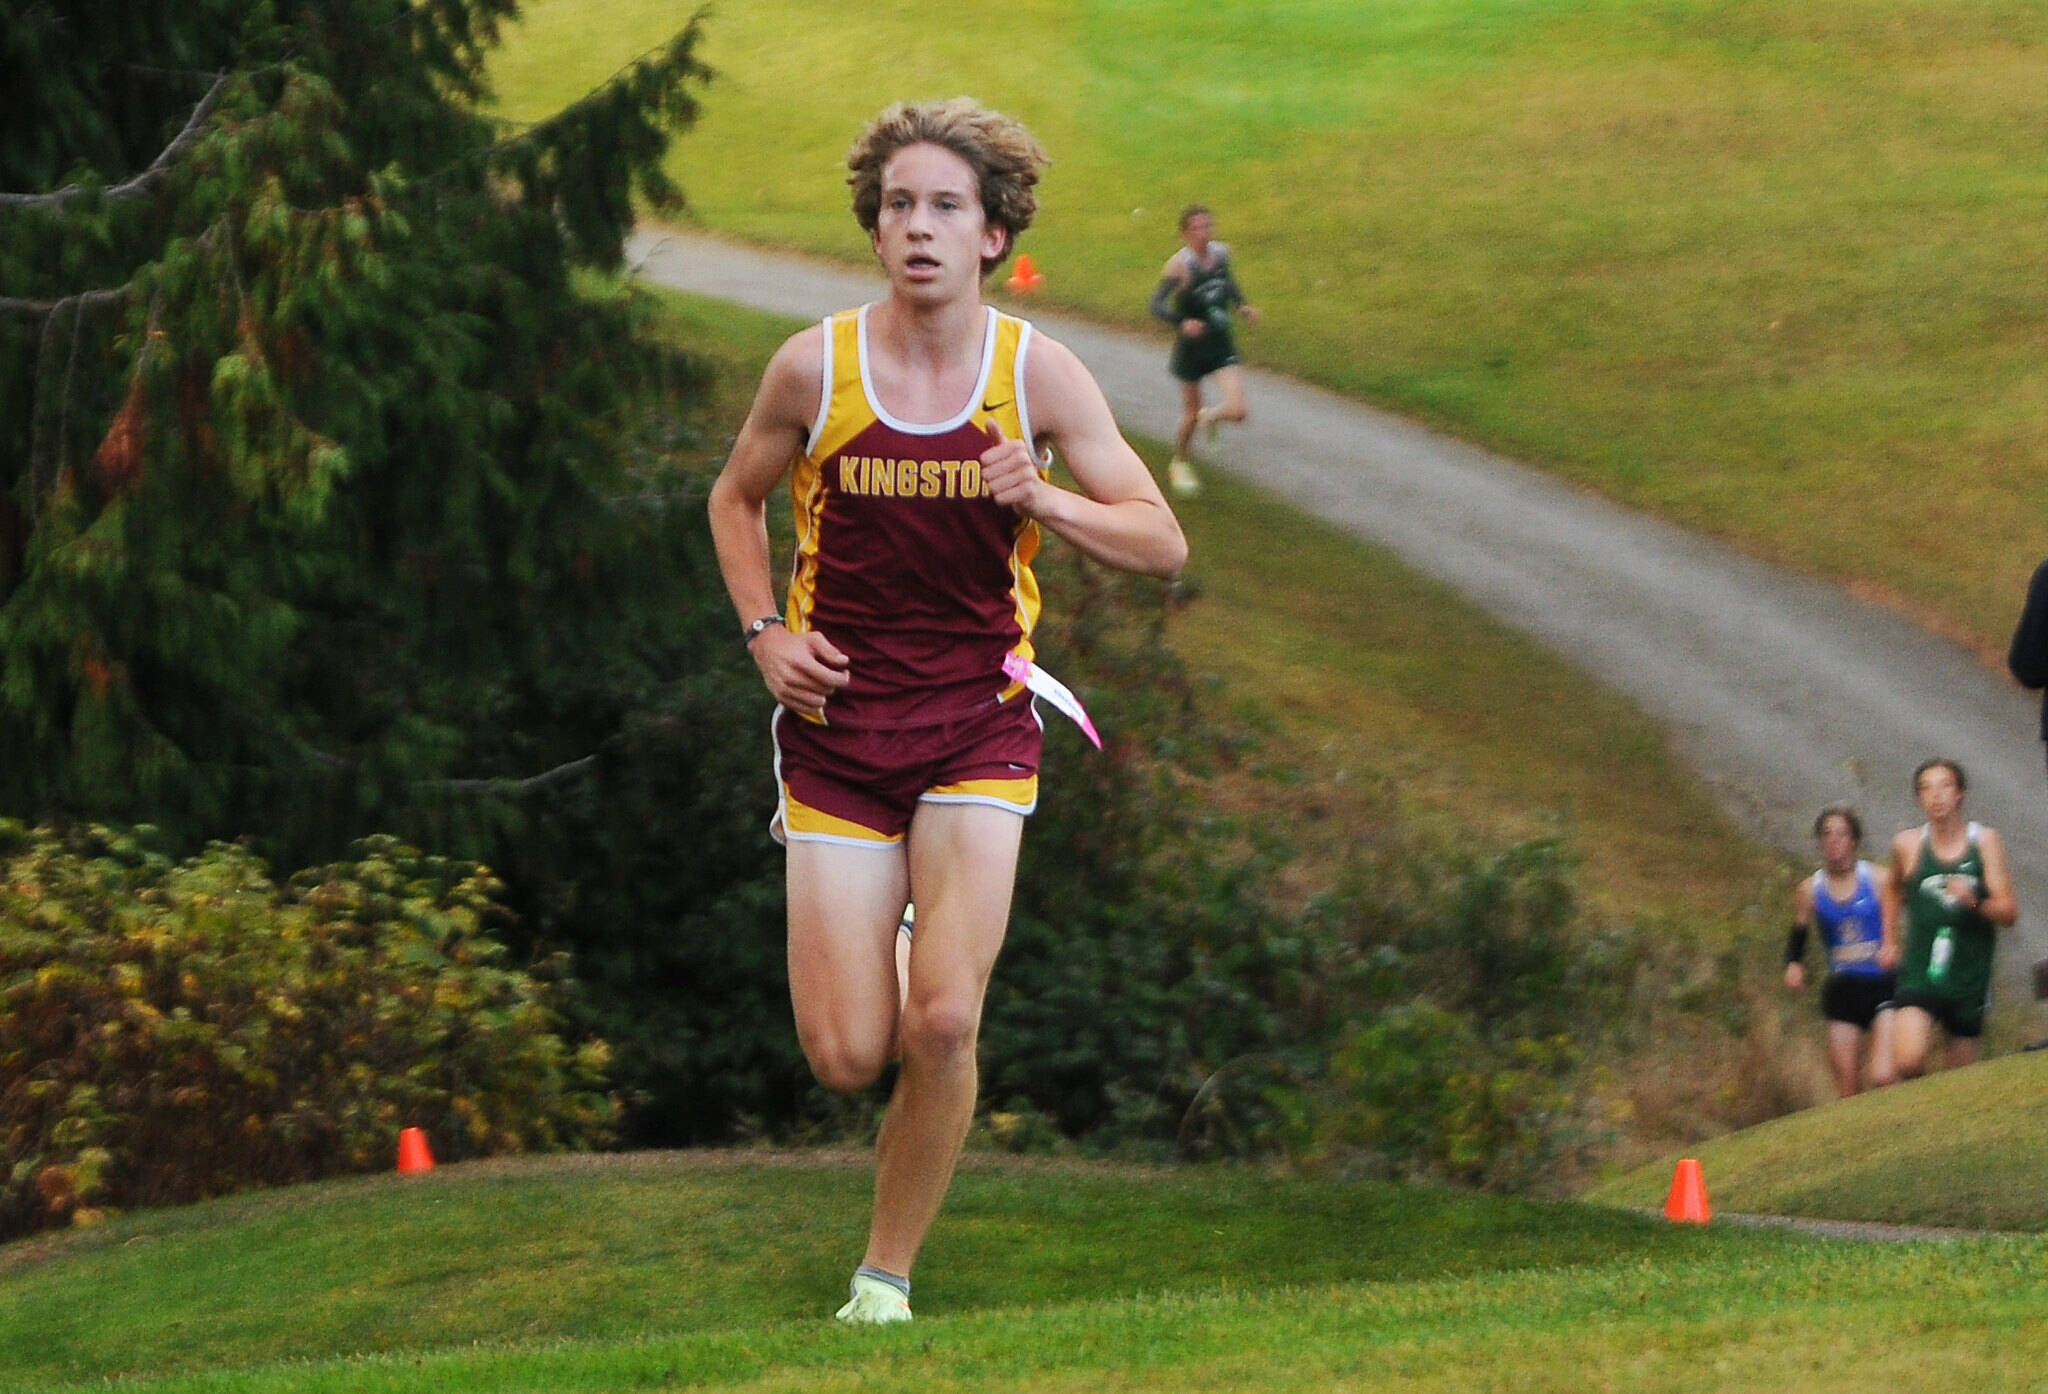 Kingston’s boys cross country team finished fifth in the 2A division. Sequim Gazette Photo Courtesy